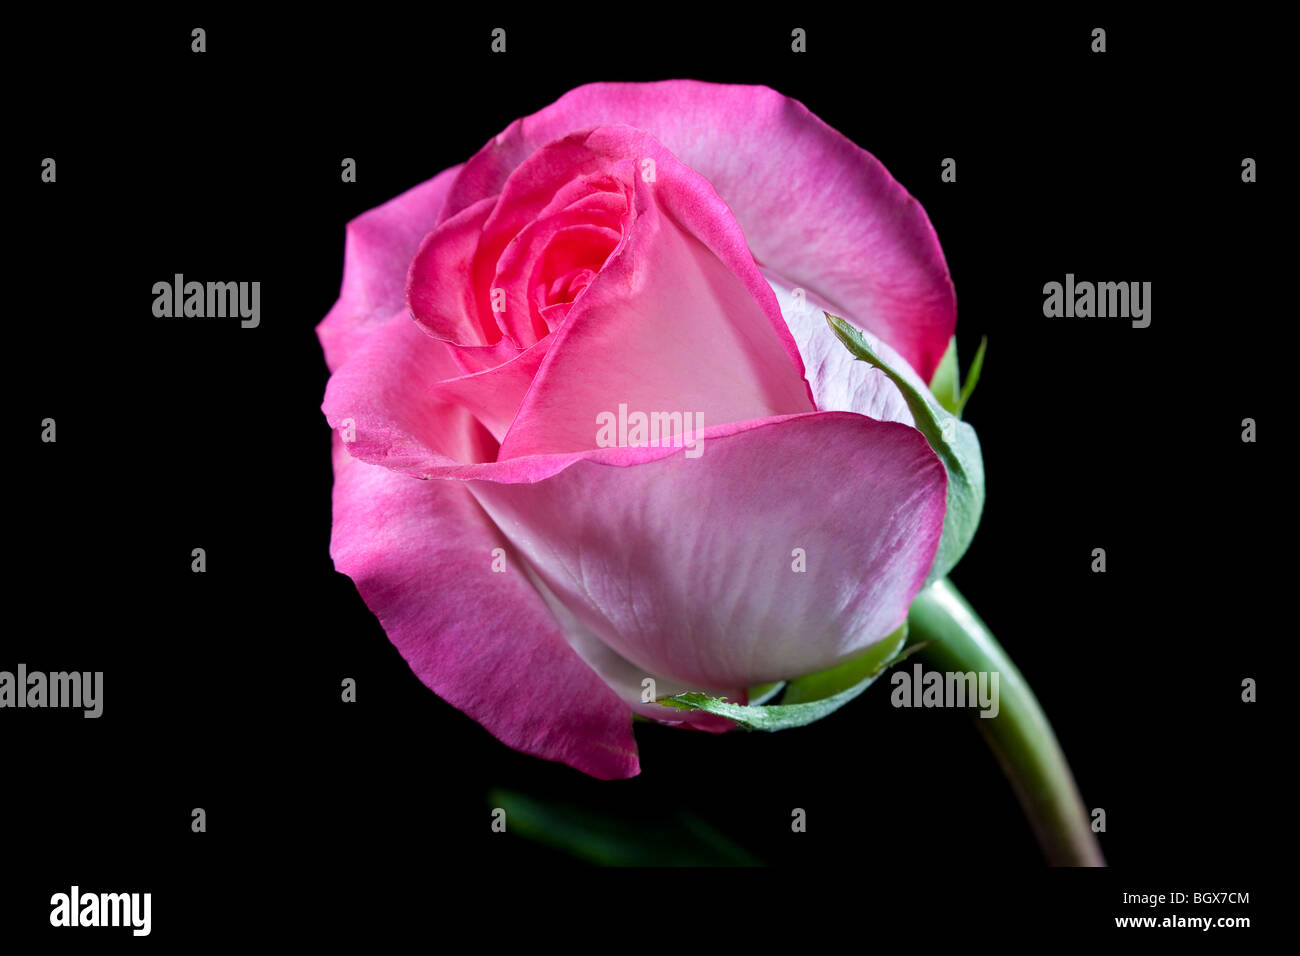 pink rose flower on a black background Stock Photo